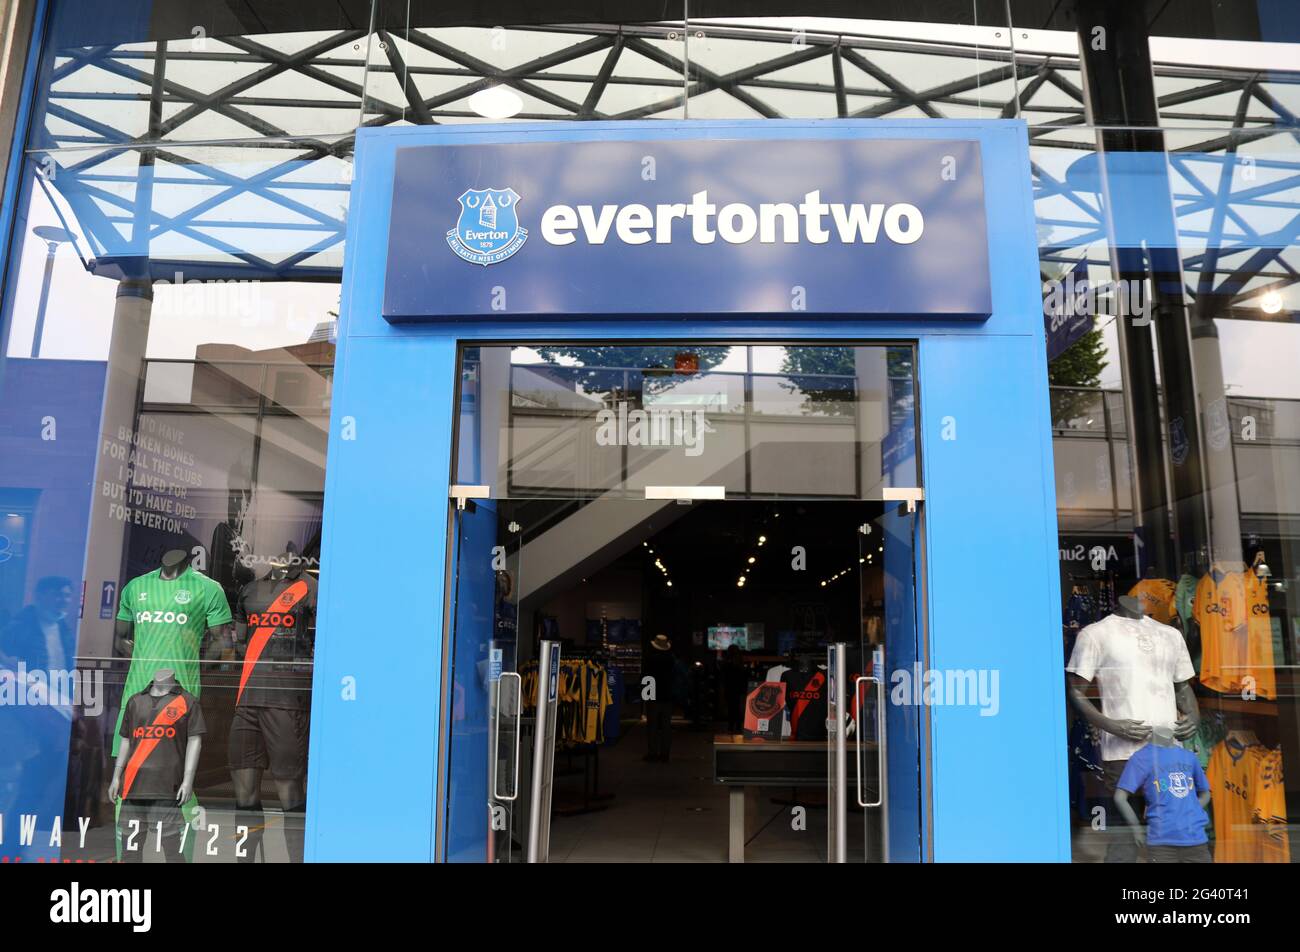 Everton Kit High Resolution Stock Photography and Images - Alamy